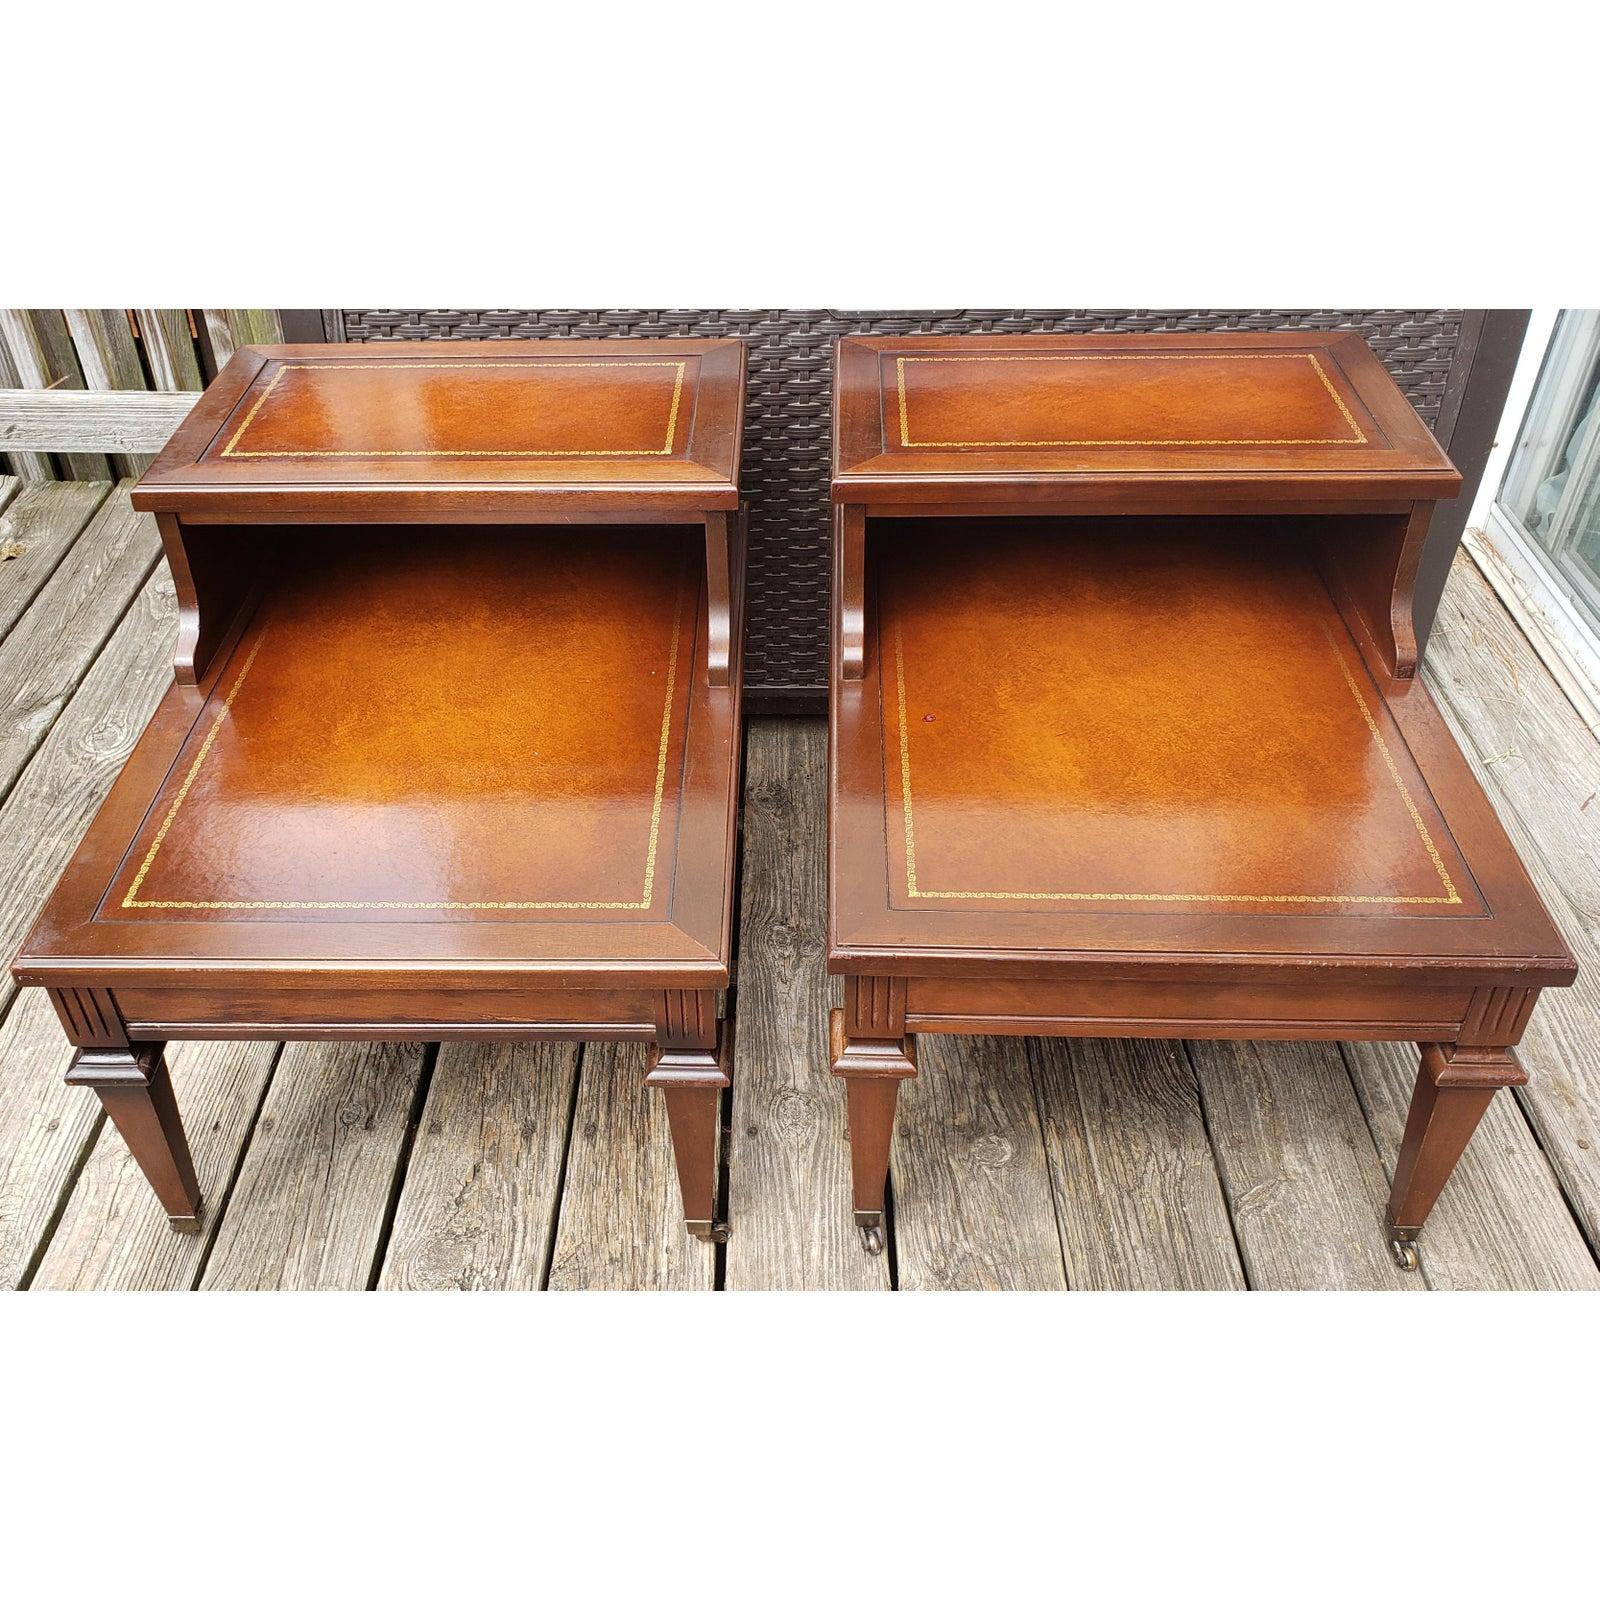 Mersman Two Tier Mahogany Tables with Leather Top Inserts Circa 1960s, a Pair For Sale 4